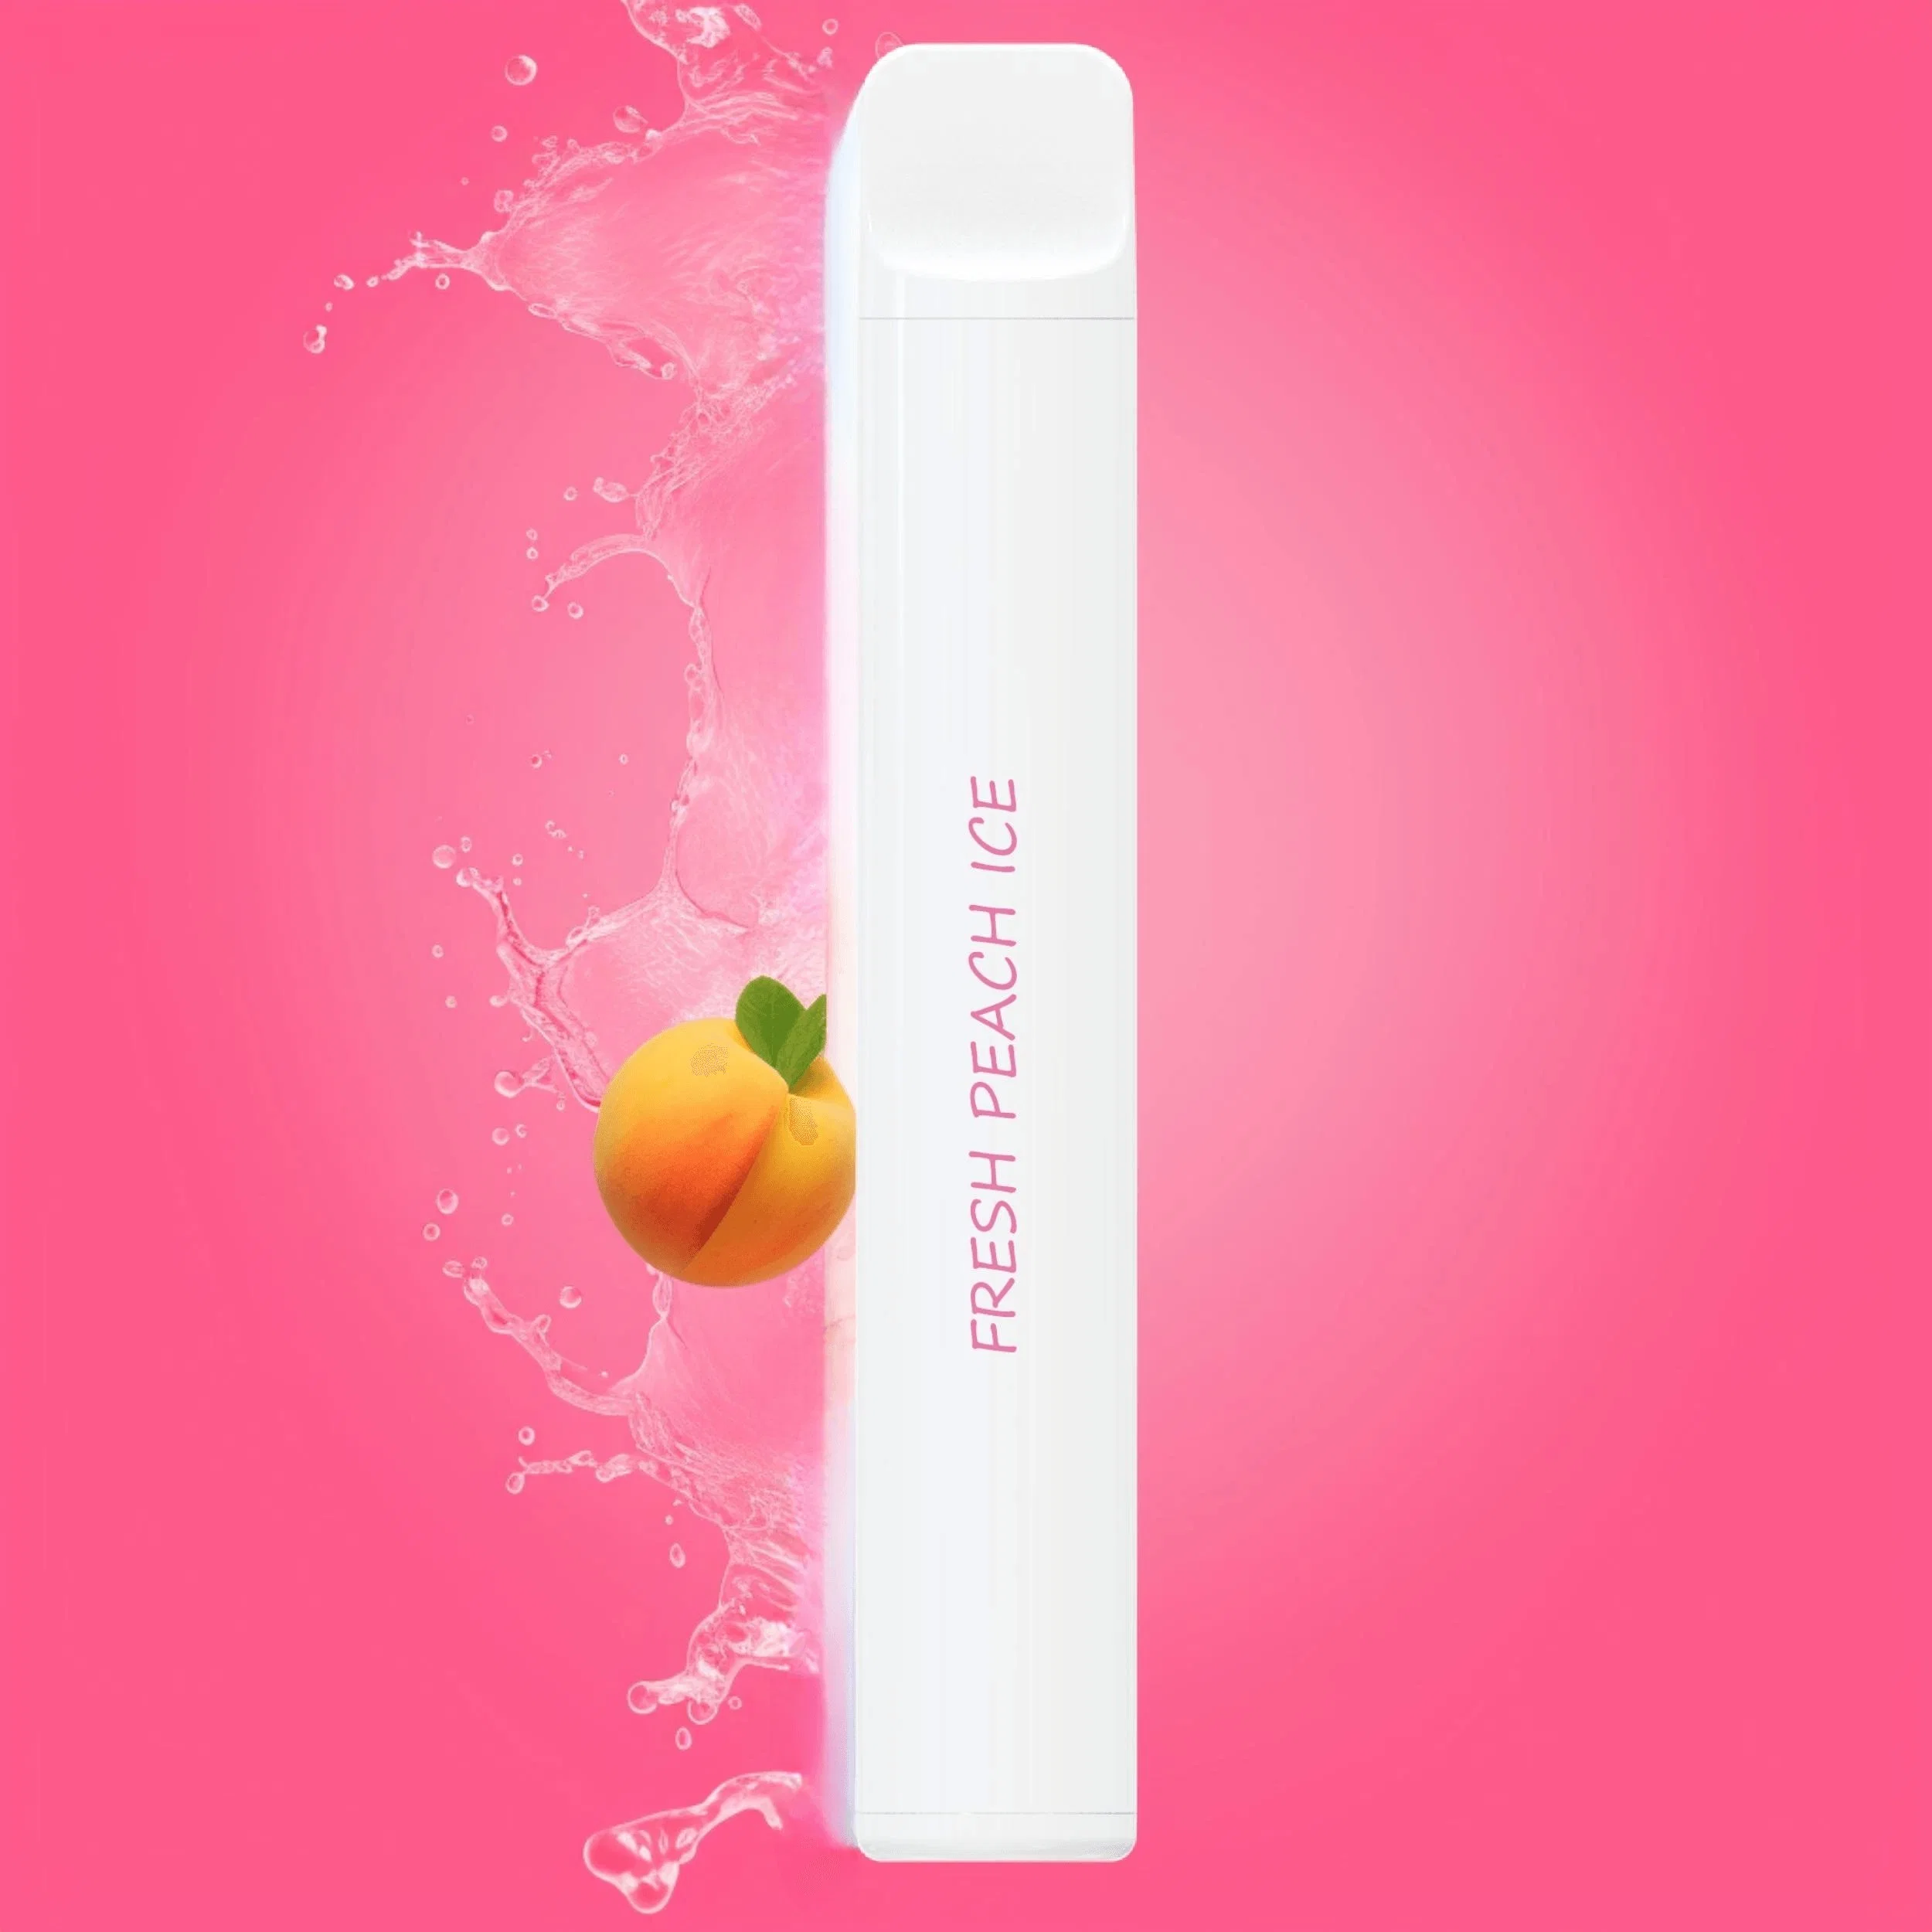 Wholesale/Supplier Cheap Vape Woomi Goal 600 Drop Shipping Vape Ship From UK 2 Days Arrive Tpd Compliant 2ml 20mg Watermelon Ice Disposable/Chargeable Vape